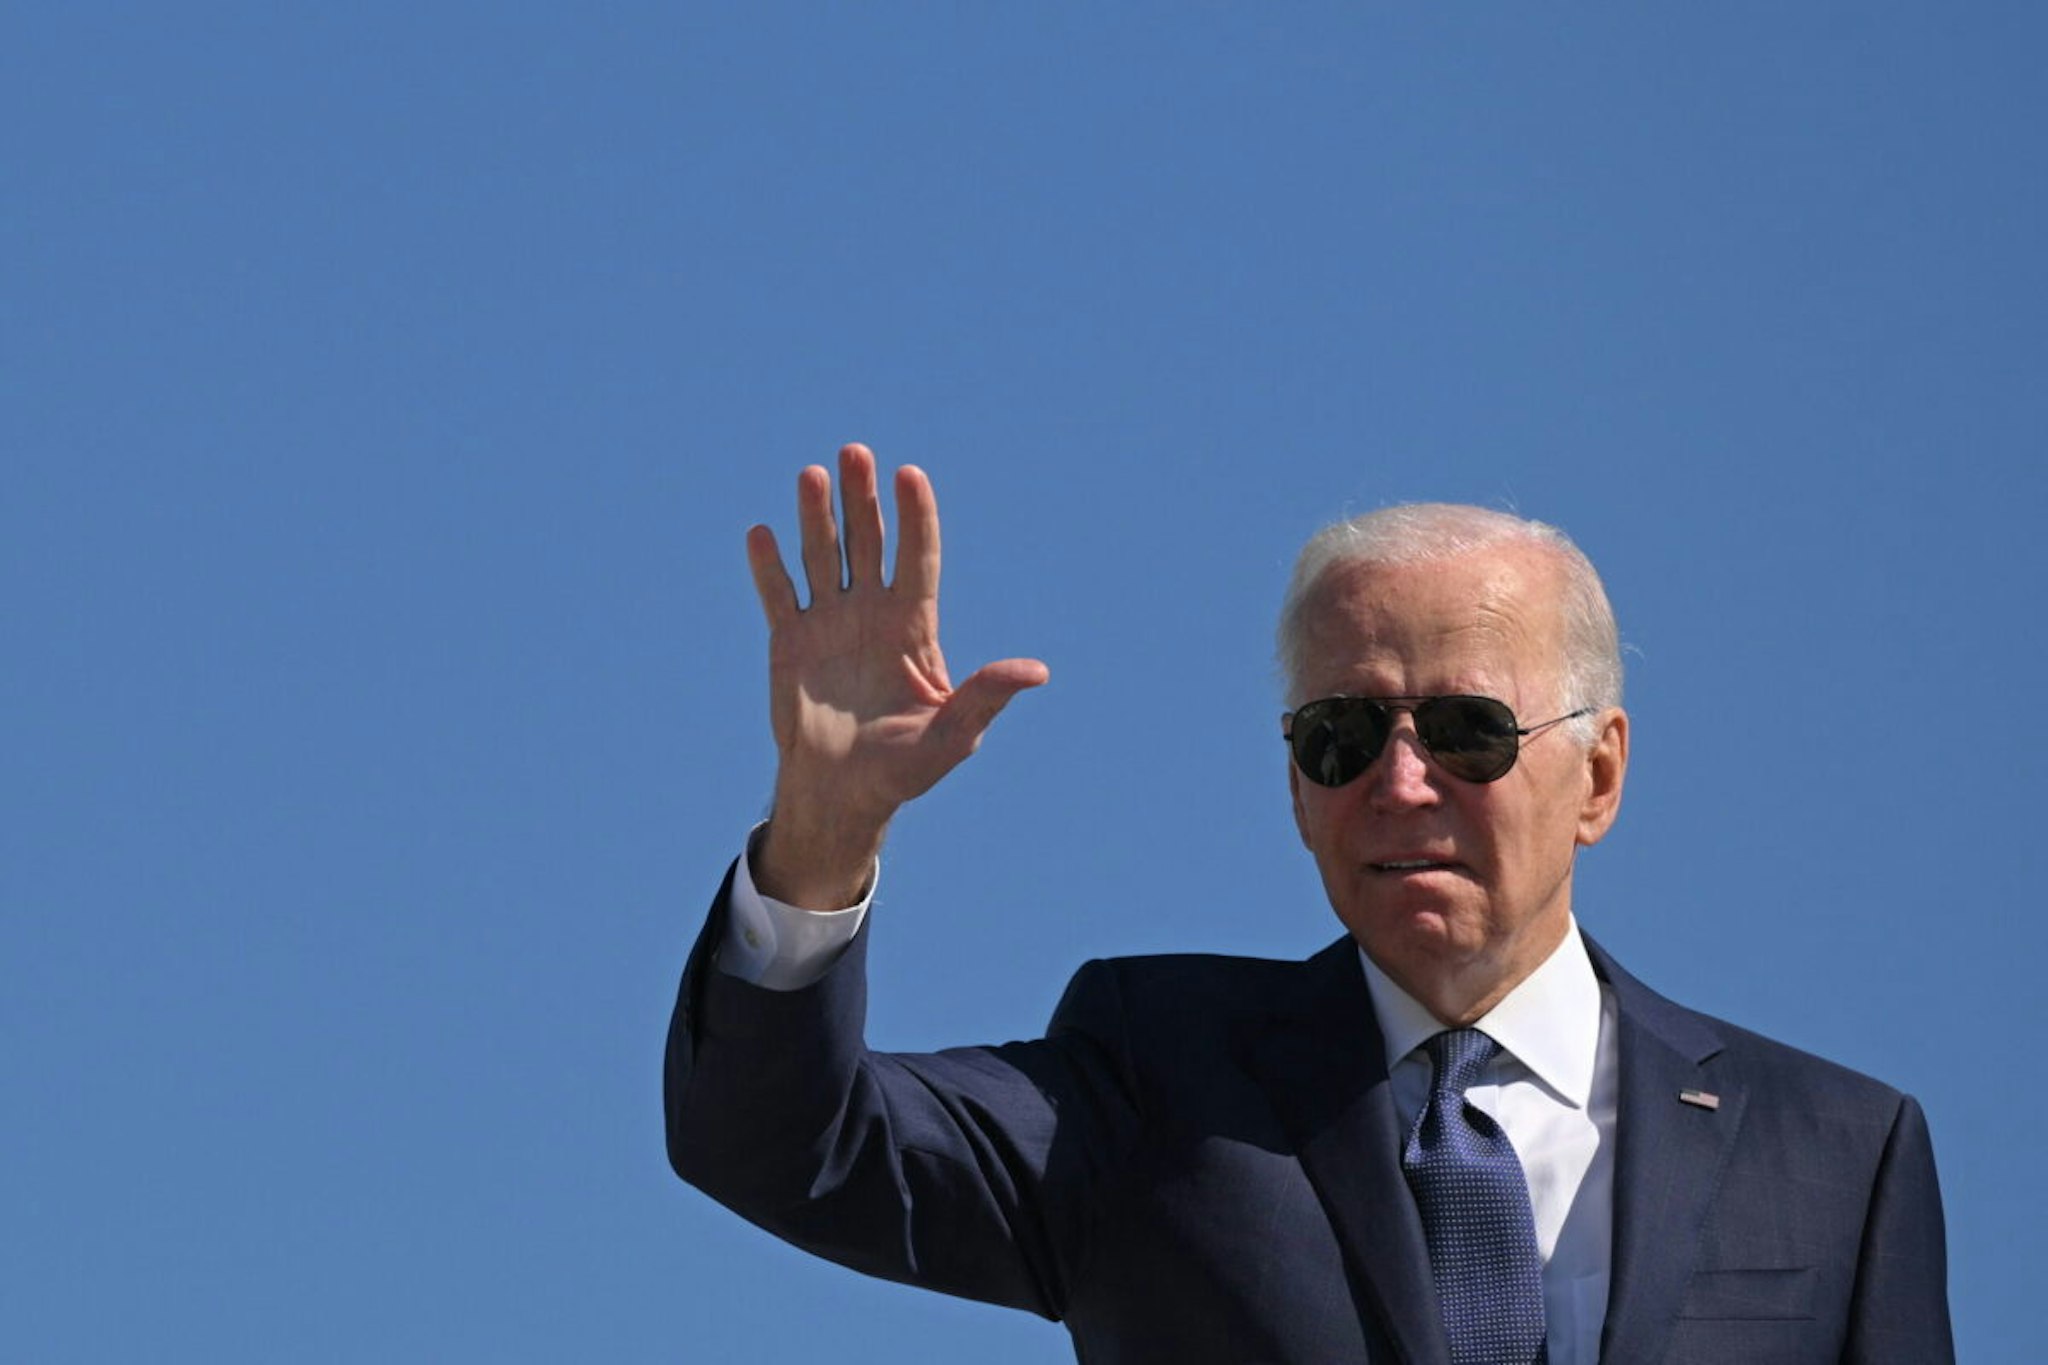 US President Joe Biden waves as he boards Air Force One before departing Joint Base Andrews in Maryland on October 7, 2022.